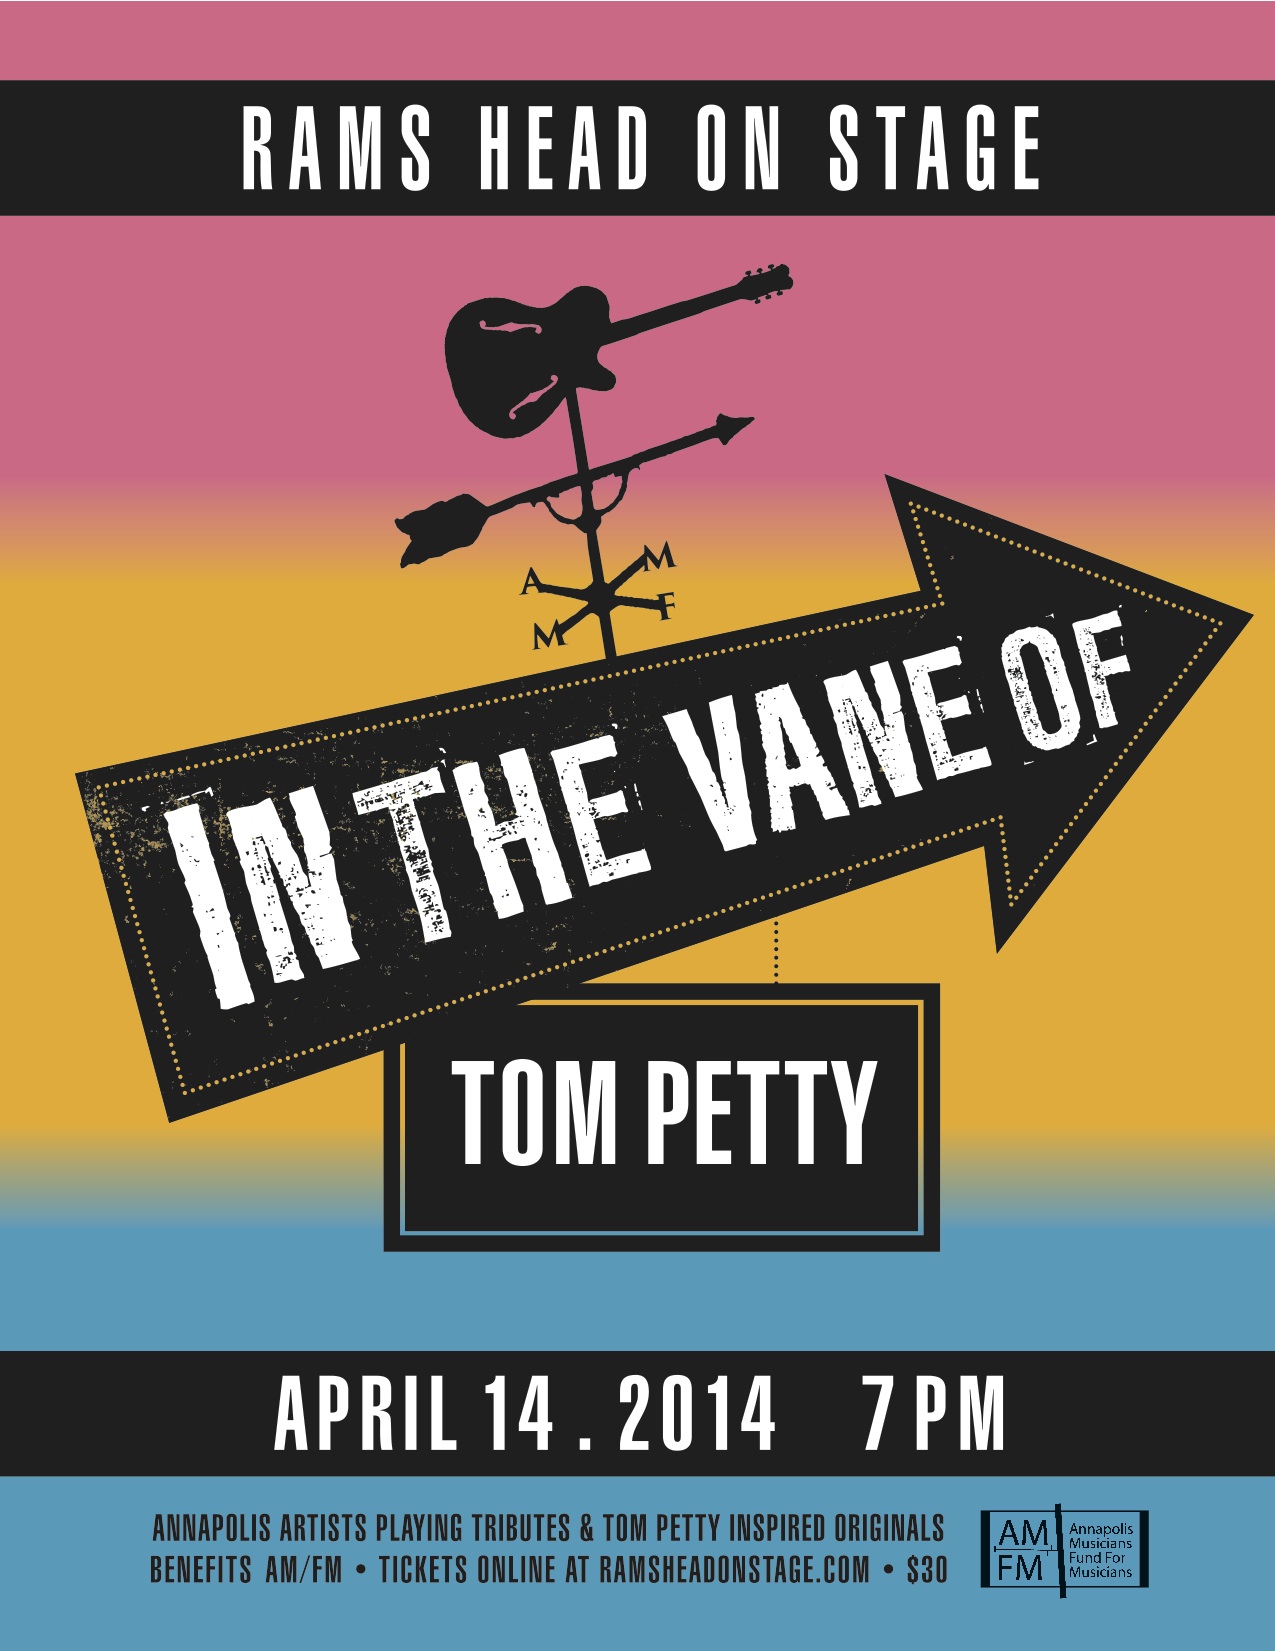 Tom Petty-inspired event aims to help musicians in need